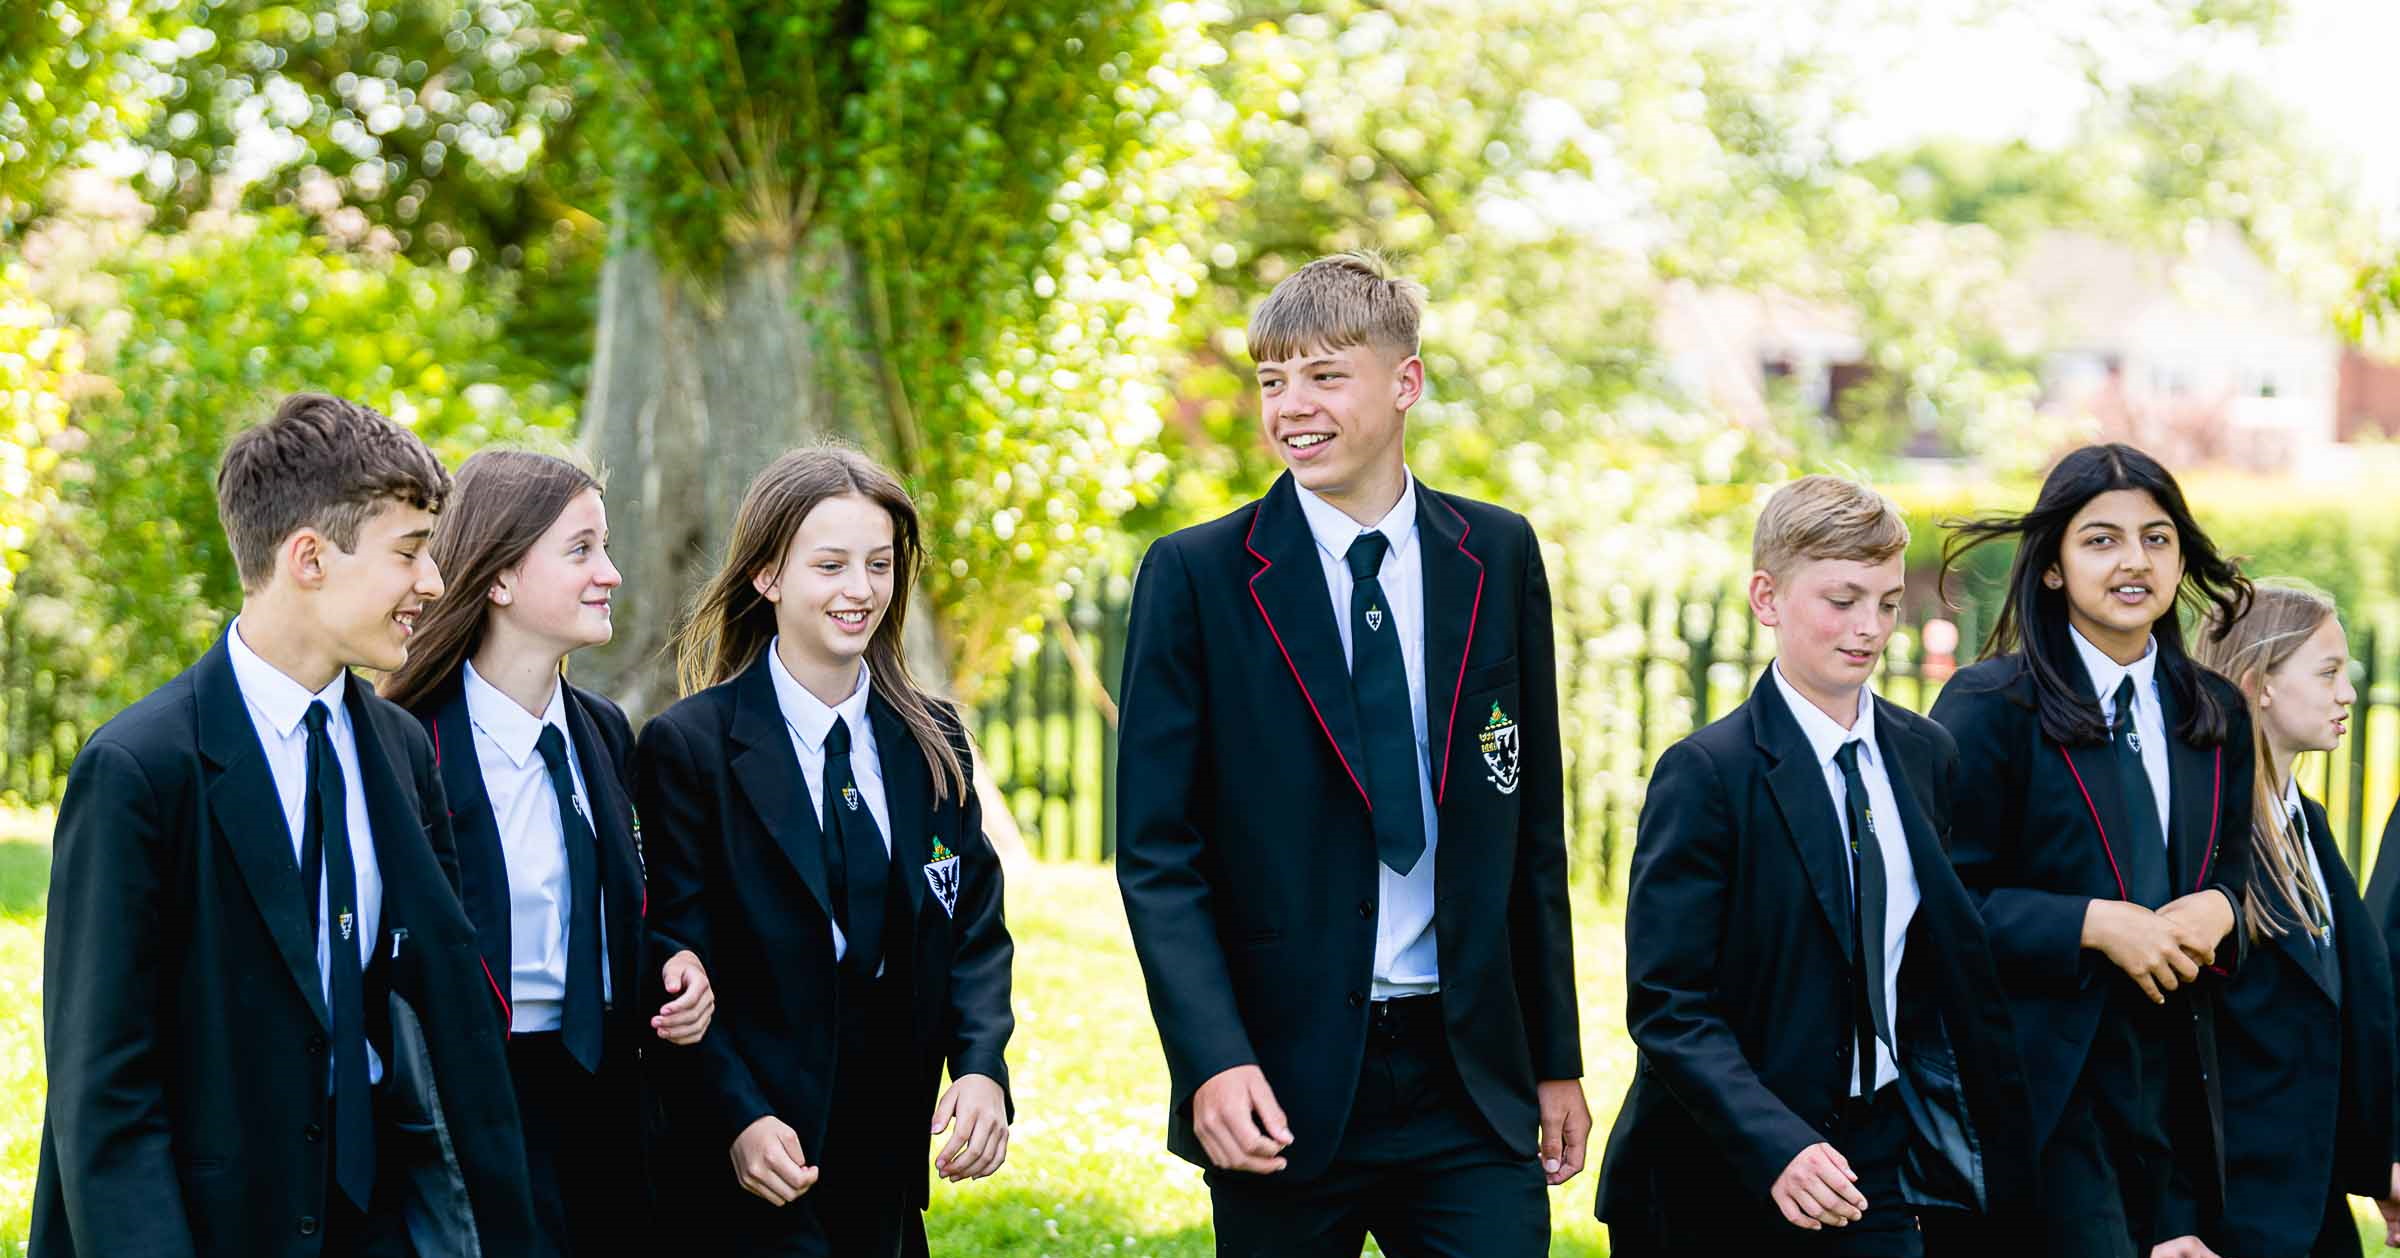 “Being a student at Humphrey Perkins is absolutely amazing. We are a community where everyone looks after one another and we all know where to go when we need support or advice. All the staff are friendly and down to earth and I feel really safe at school.”